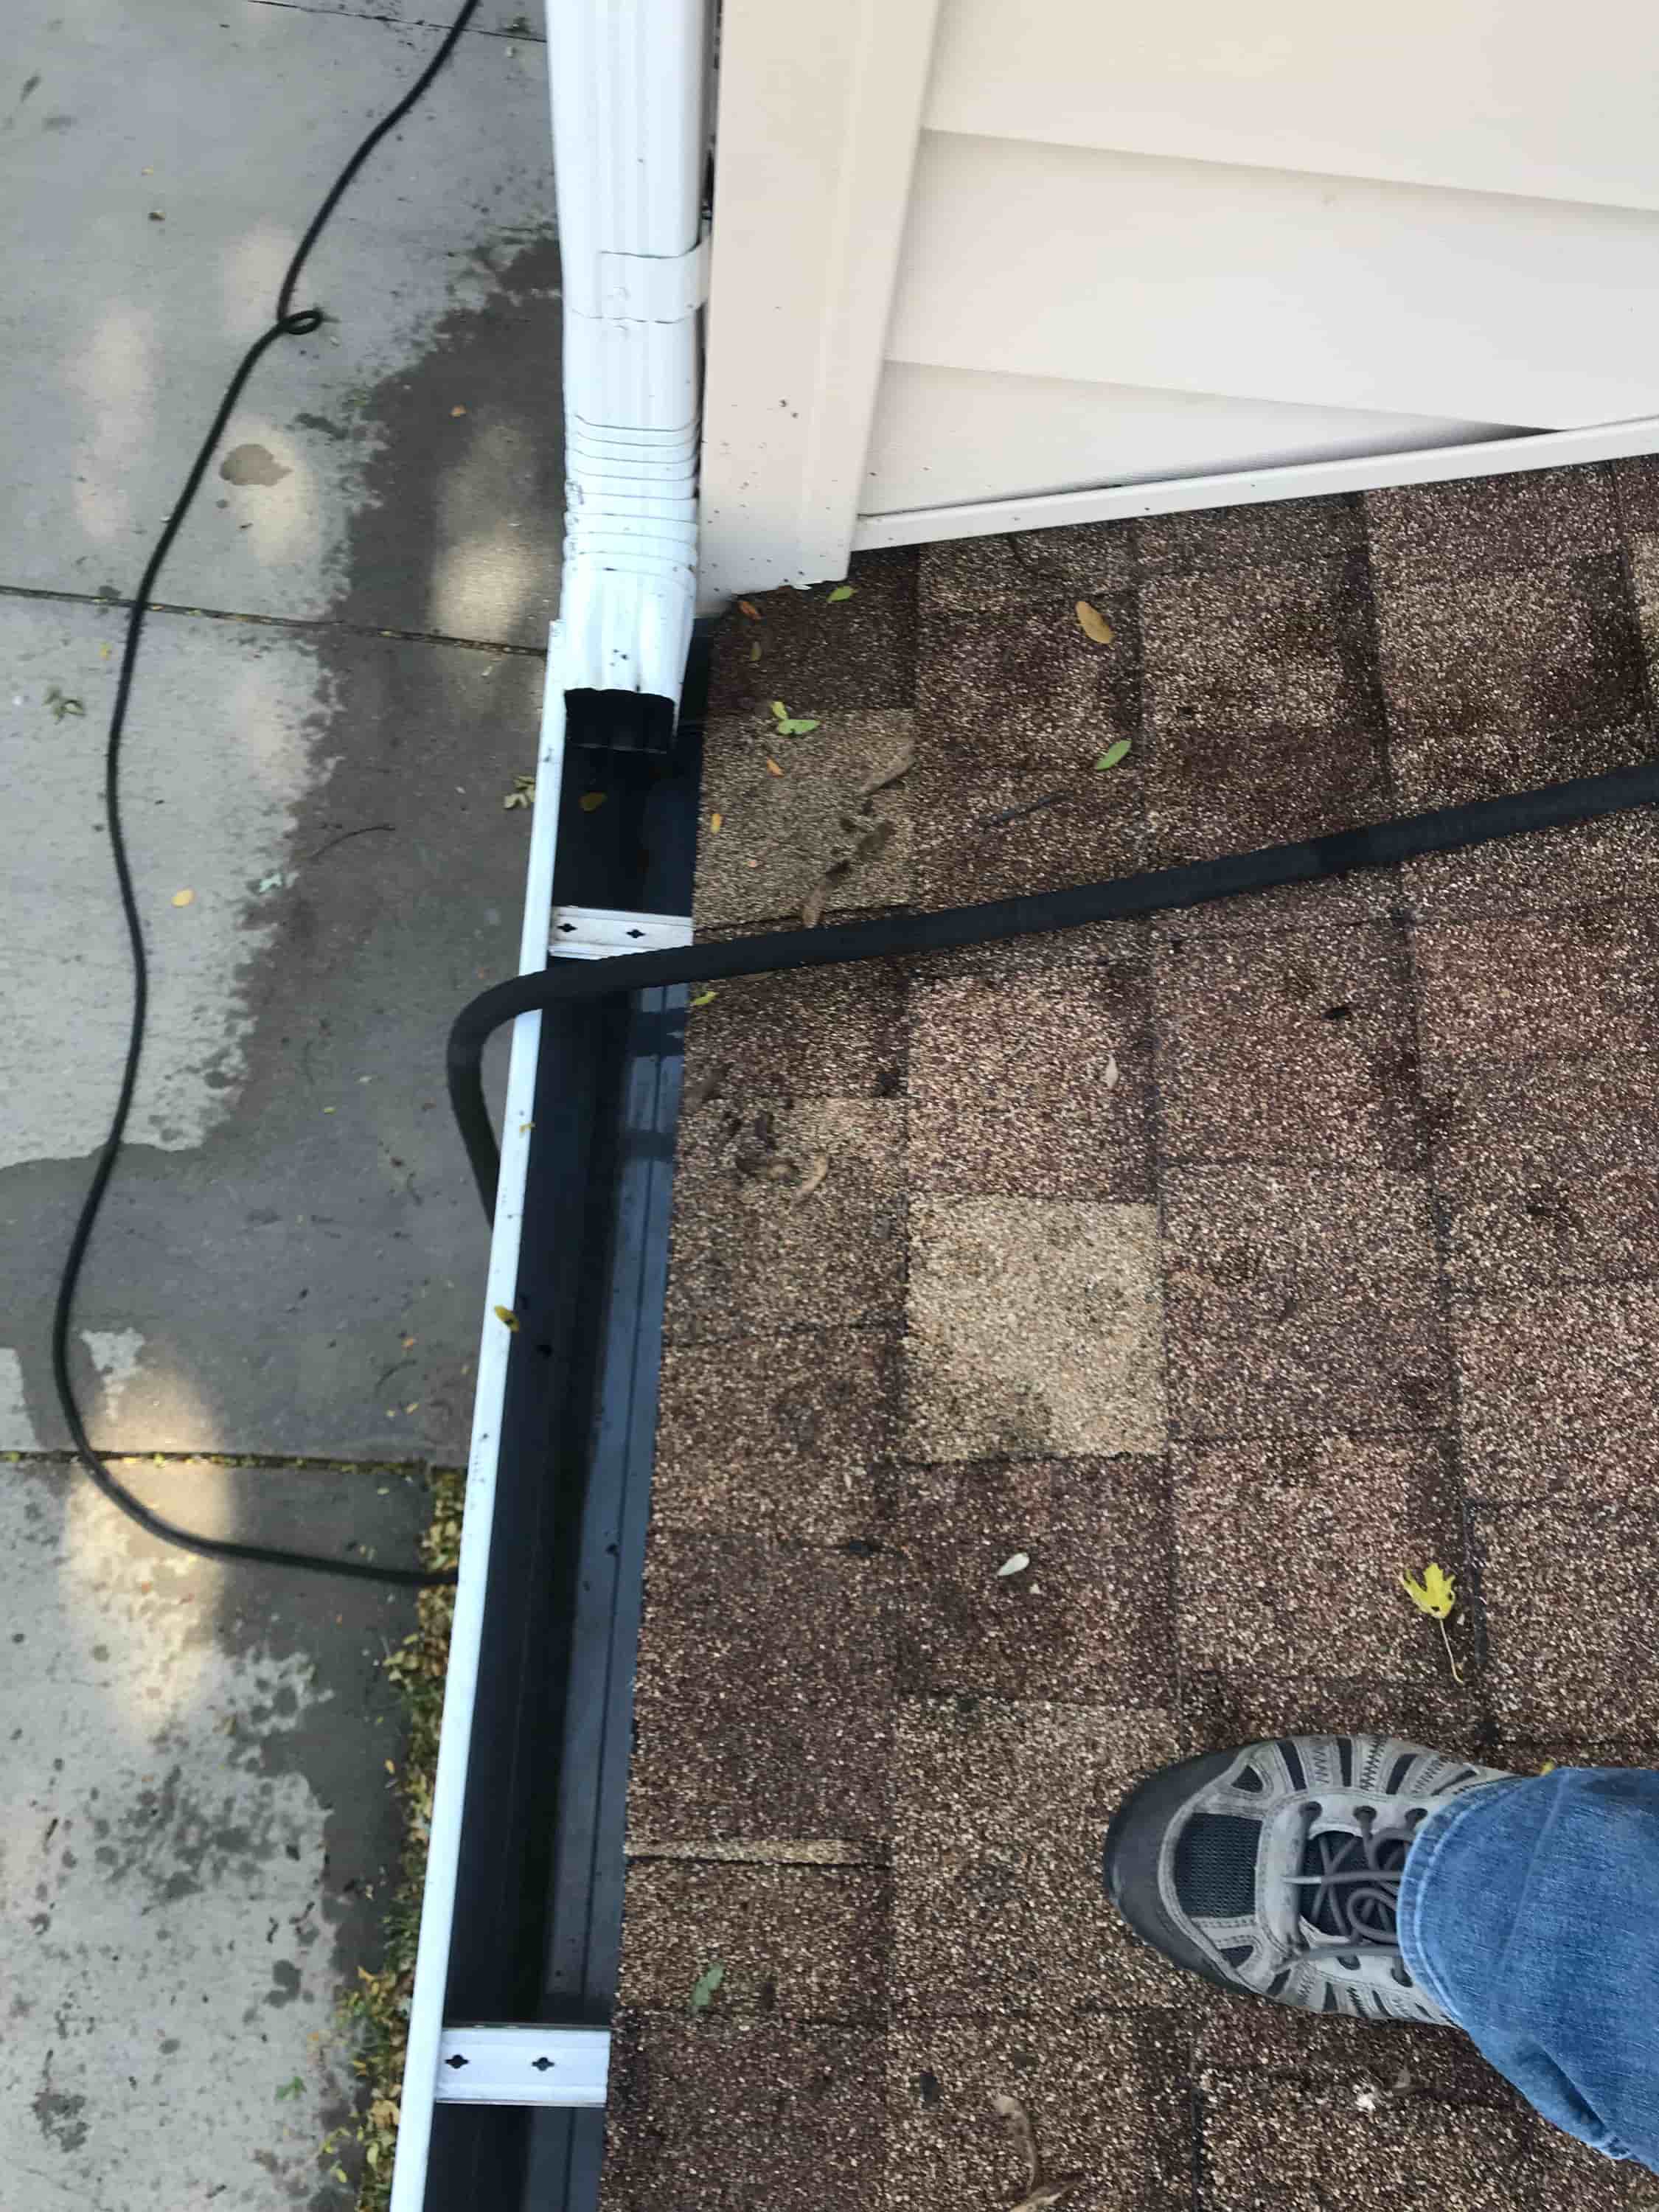 extended reach gutter cleaning wand